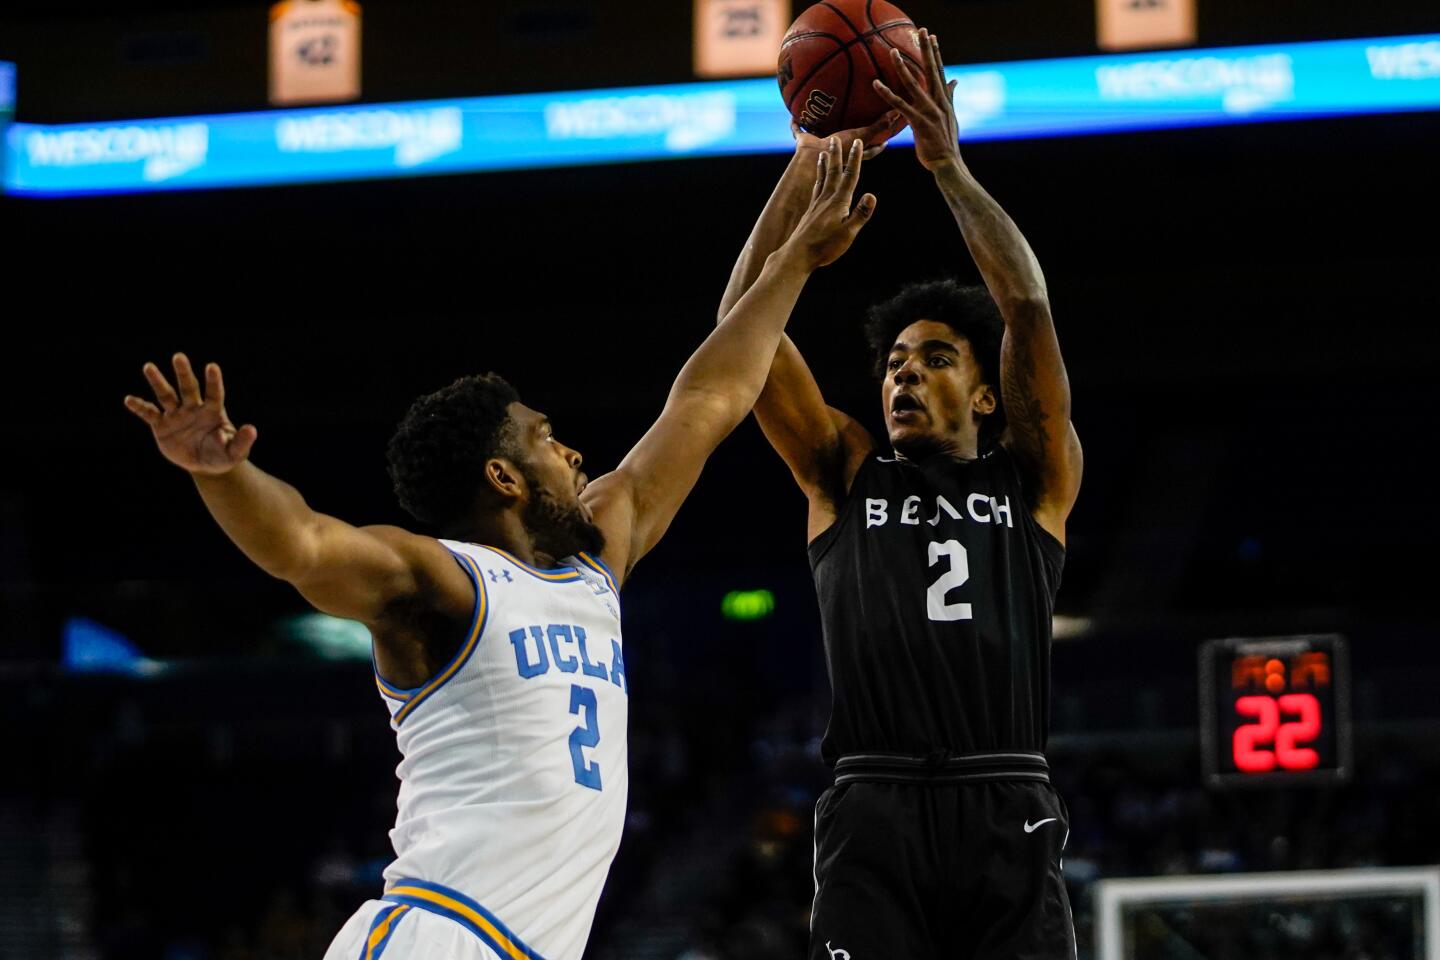 Long Beach State guard Jordan Roberts (2) shoots while being defended by UCLA forward Cody Riley (2) during the first half of a game Nov. 6 at Pauley Pavilion.